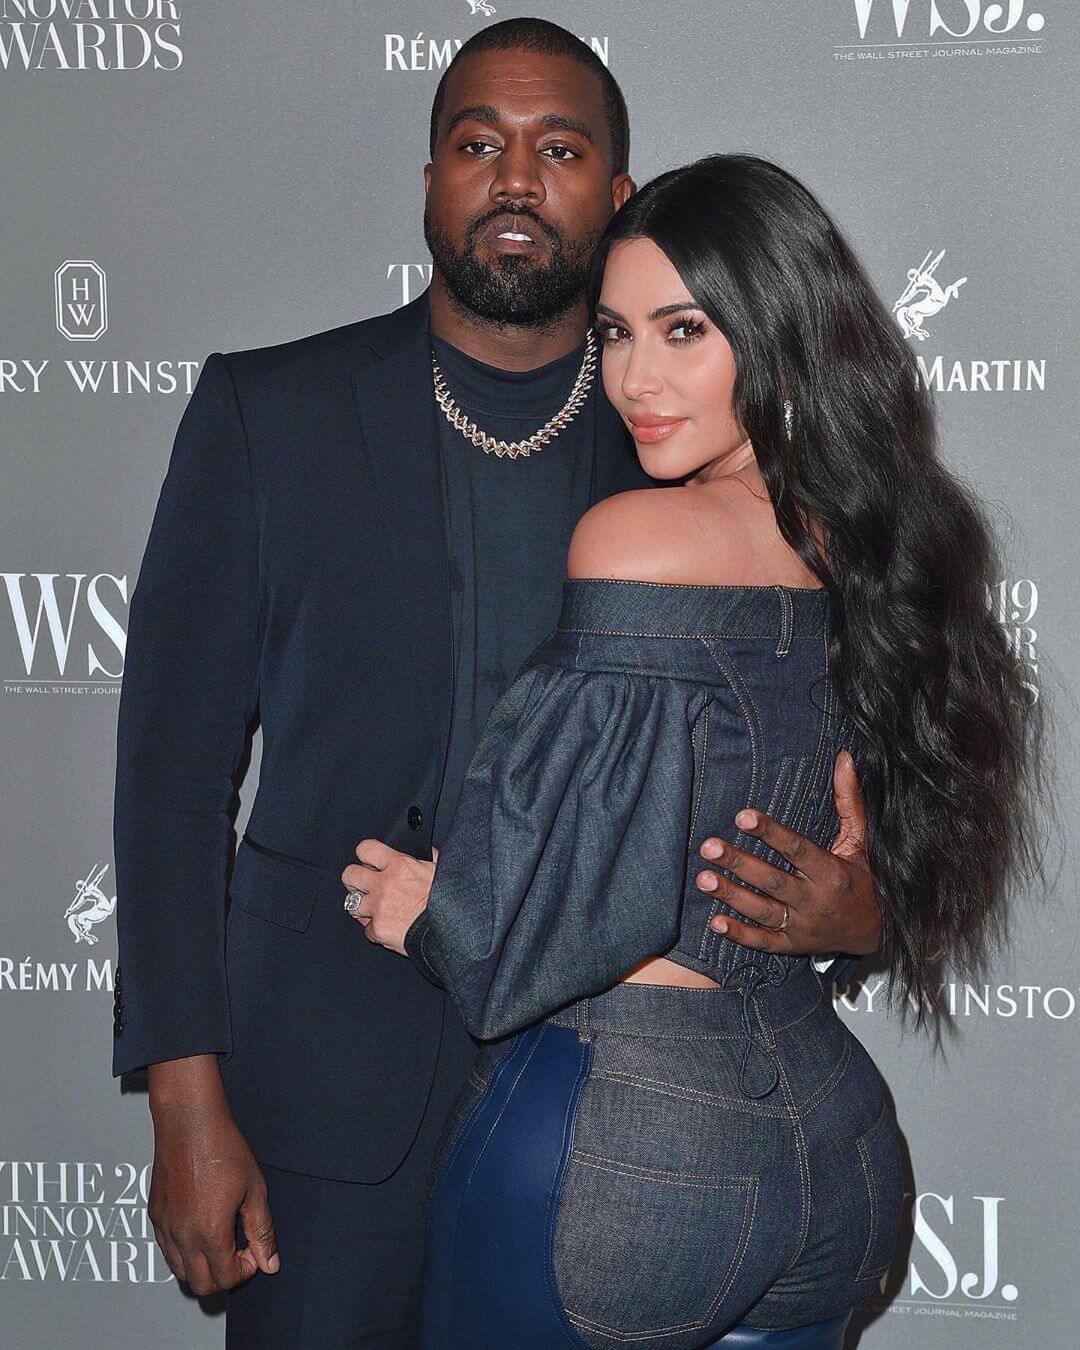 With her husband, Kanye West